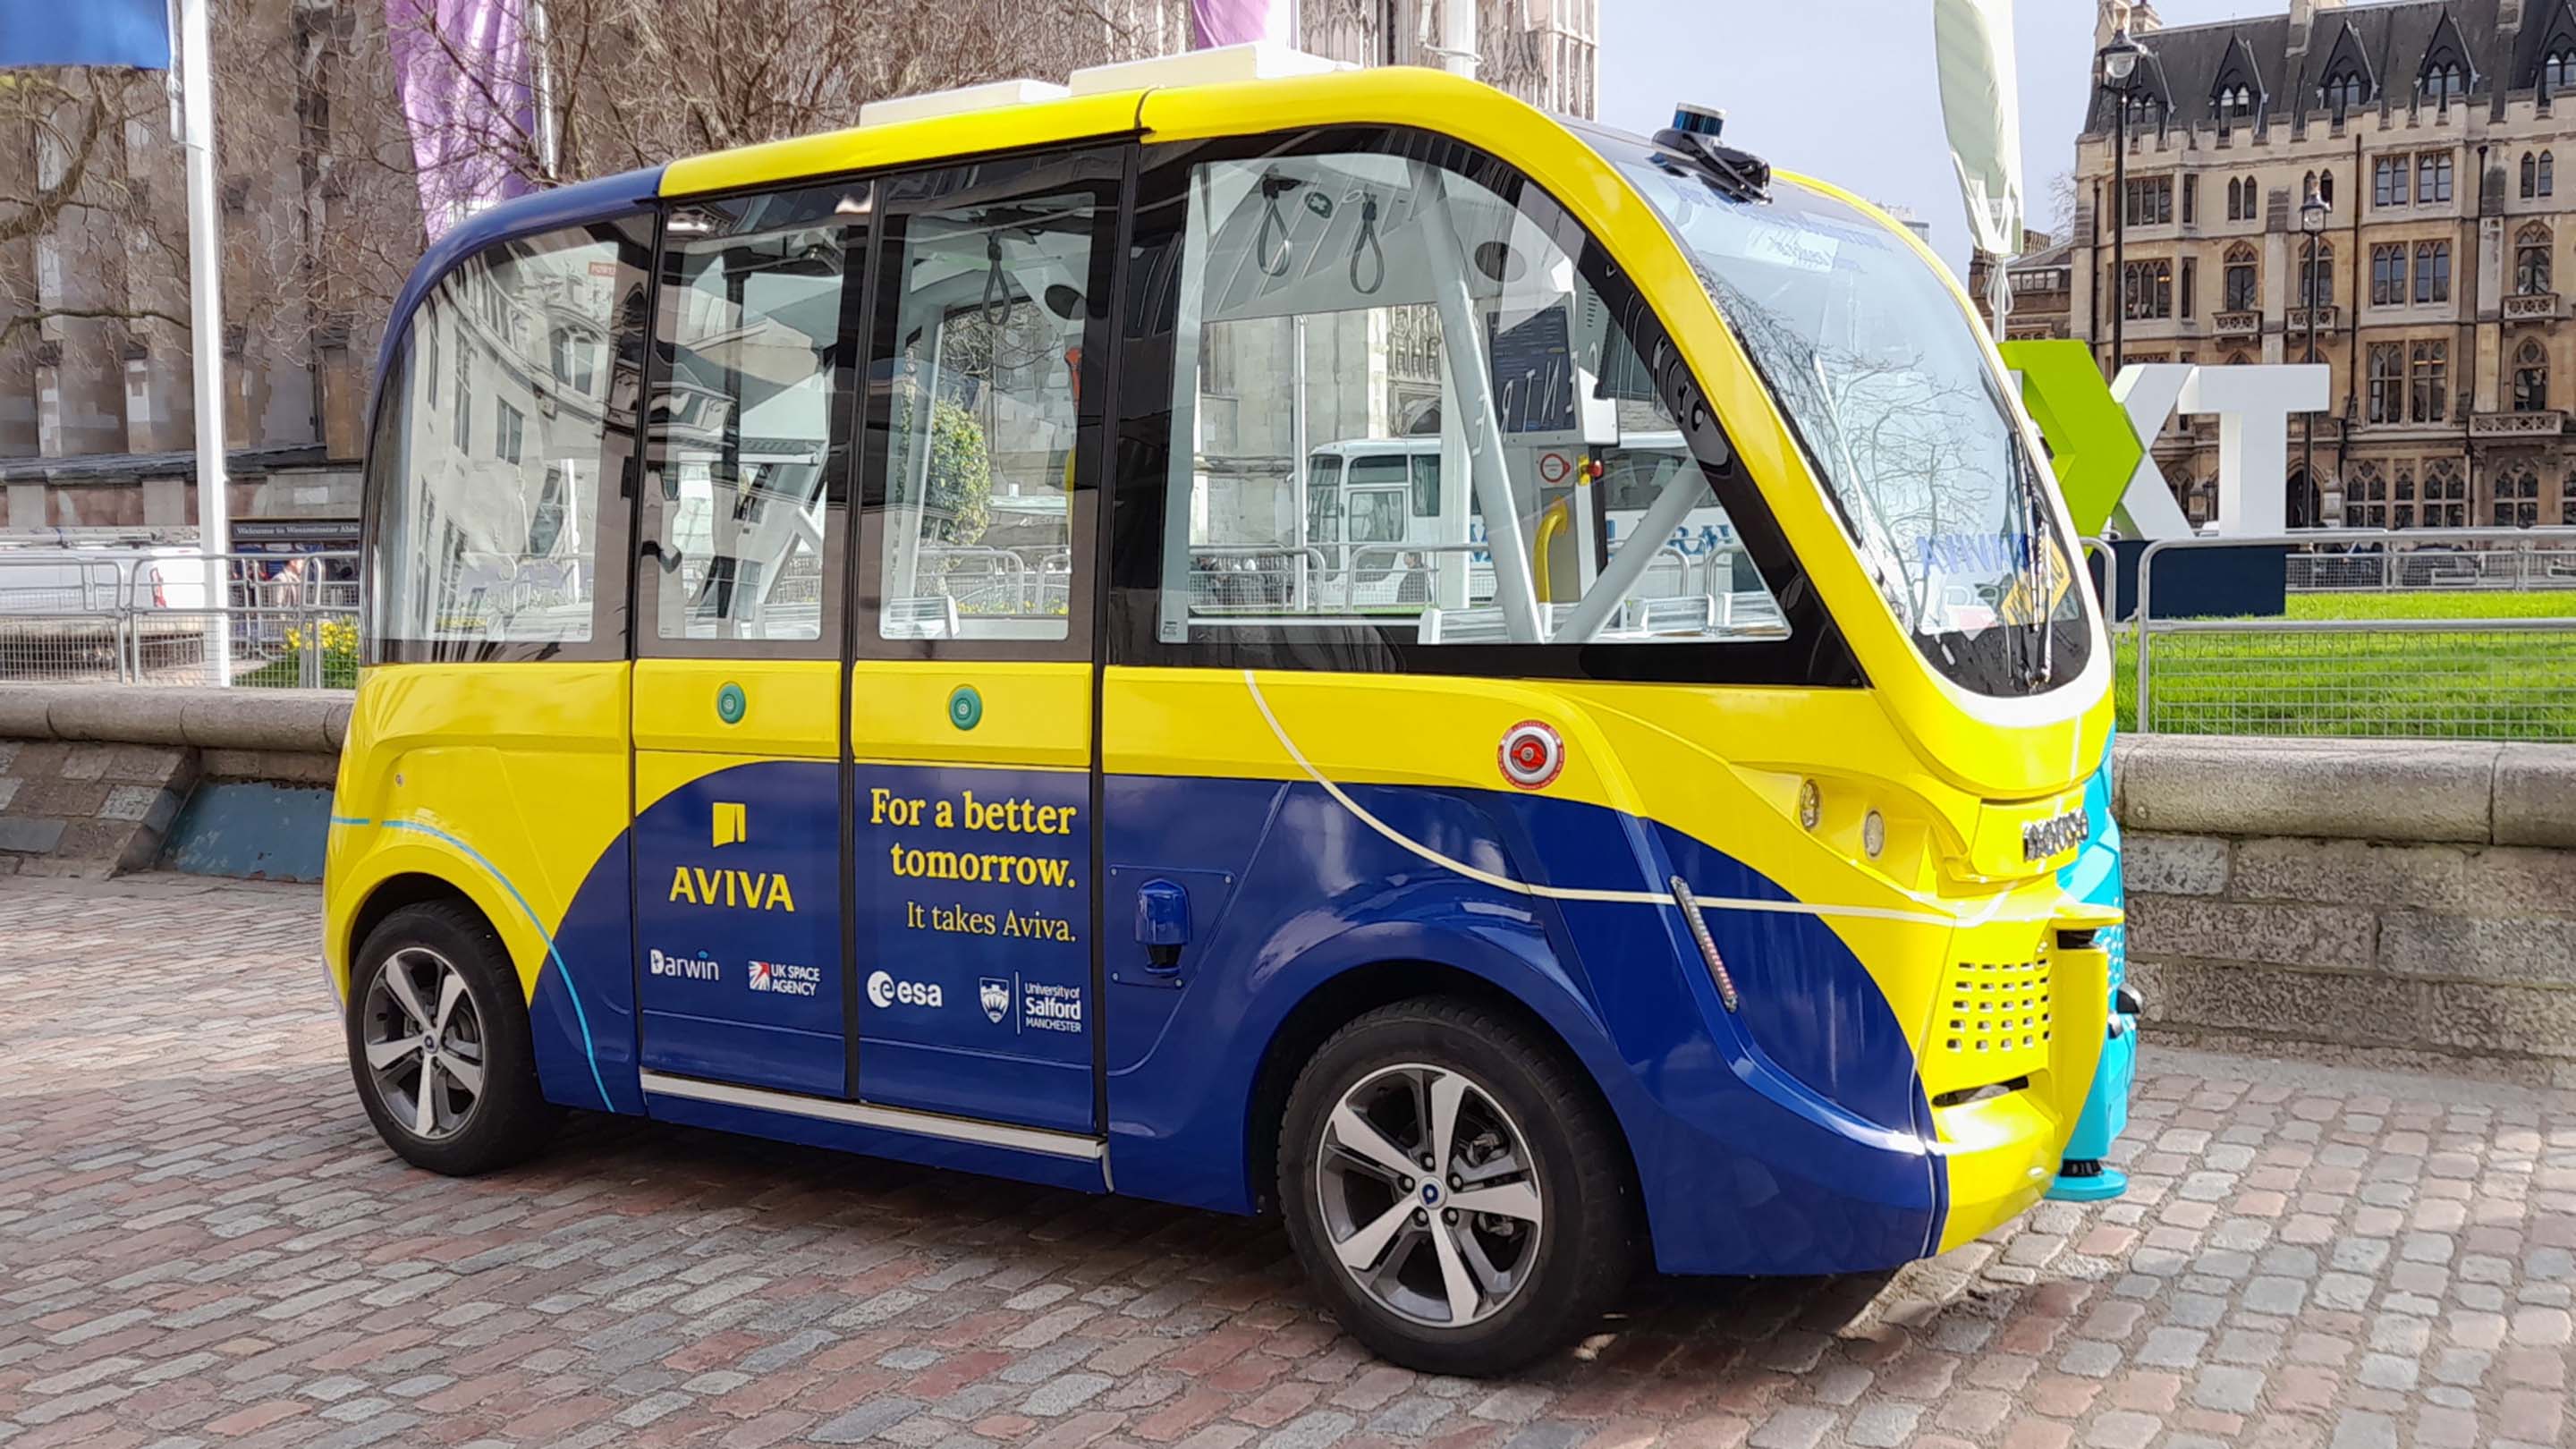 The autonomous shuttle, wrapped in yellow and blue Aviva branding